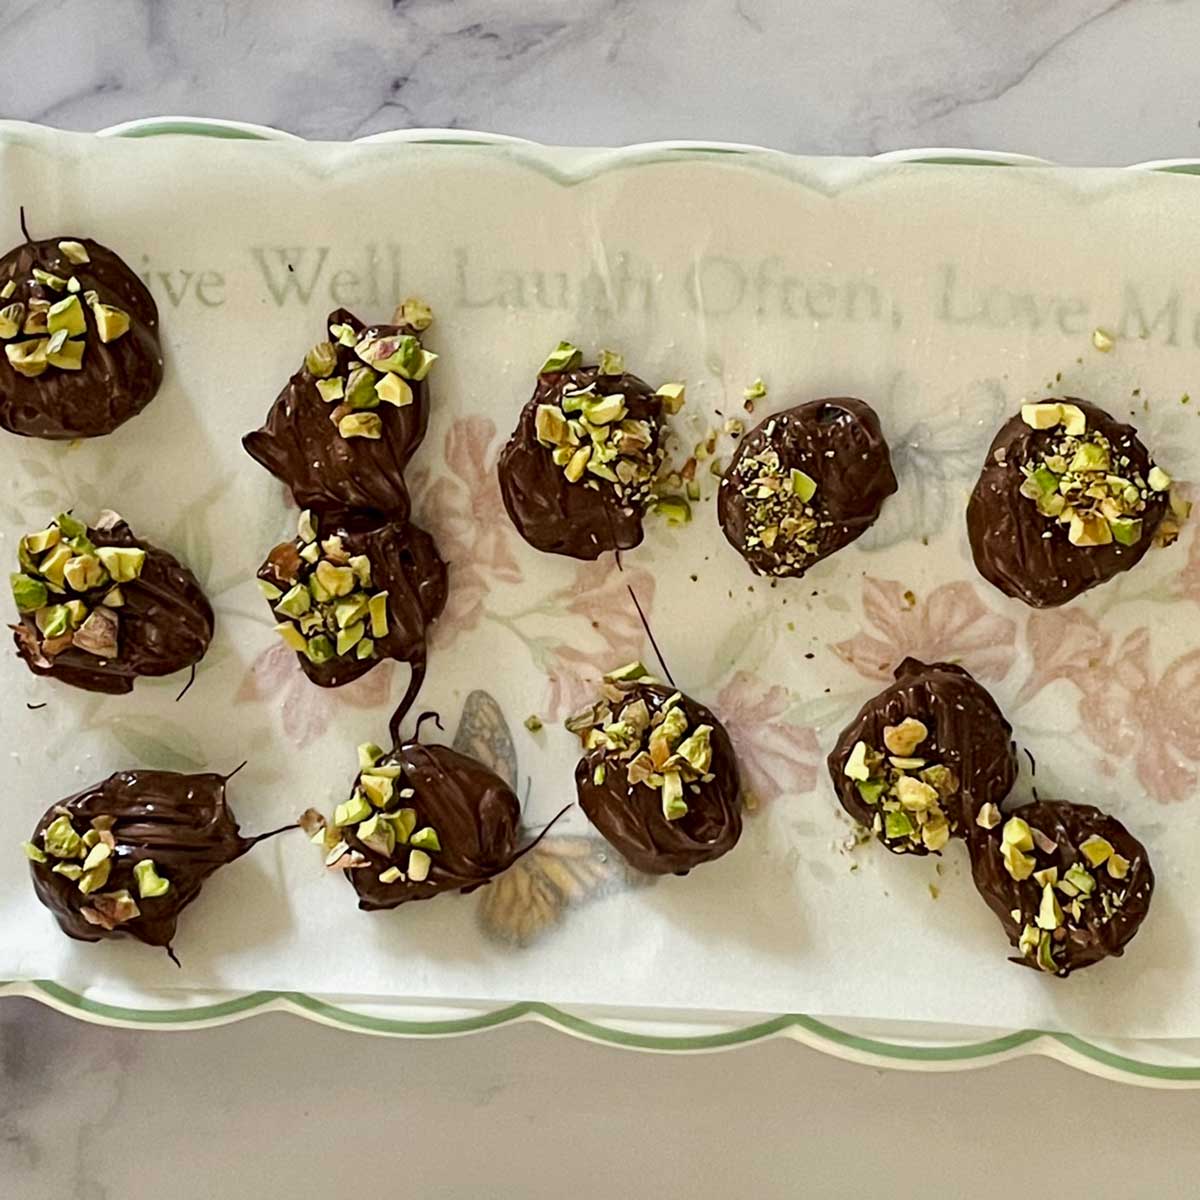 Chocolate coated apricot garnished with pistachios.